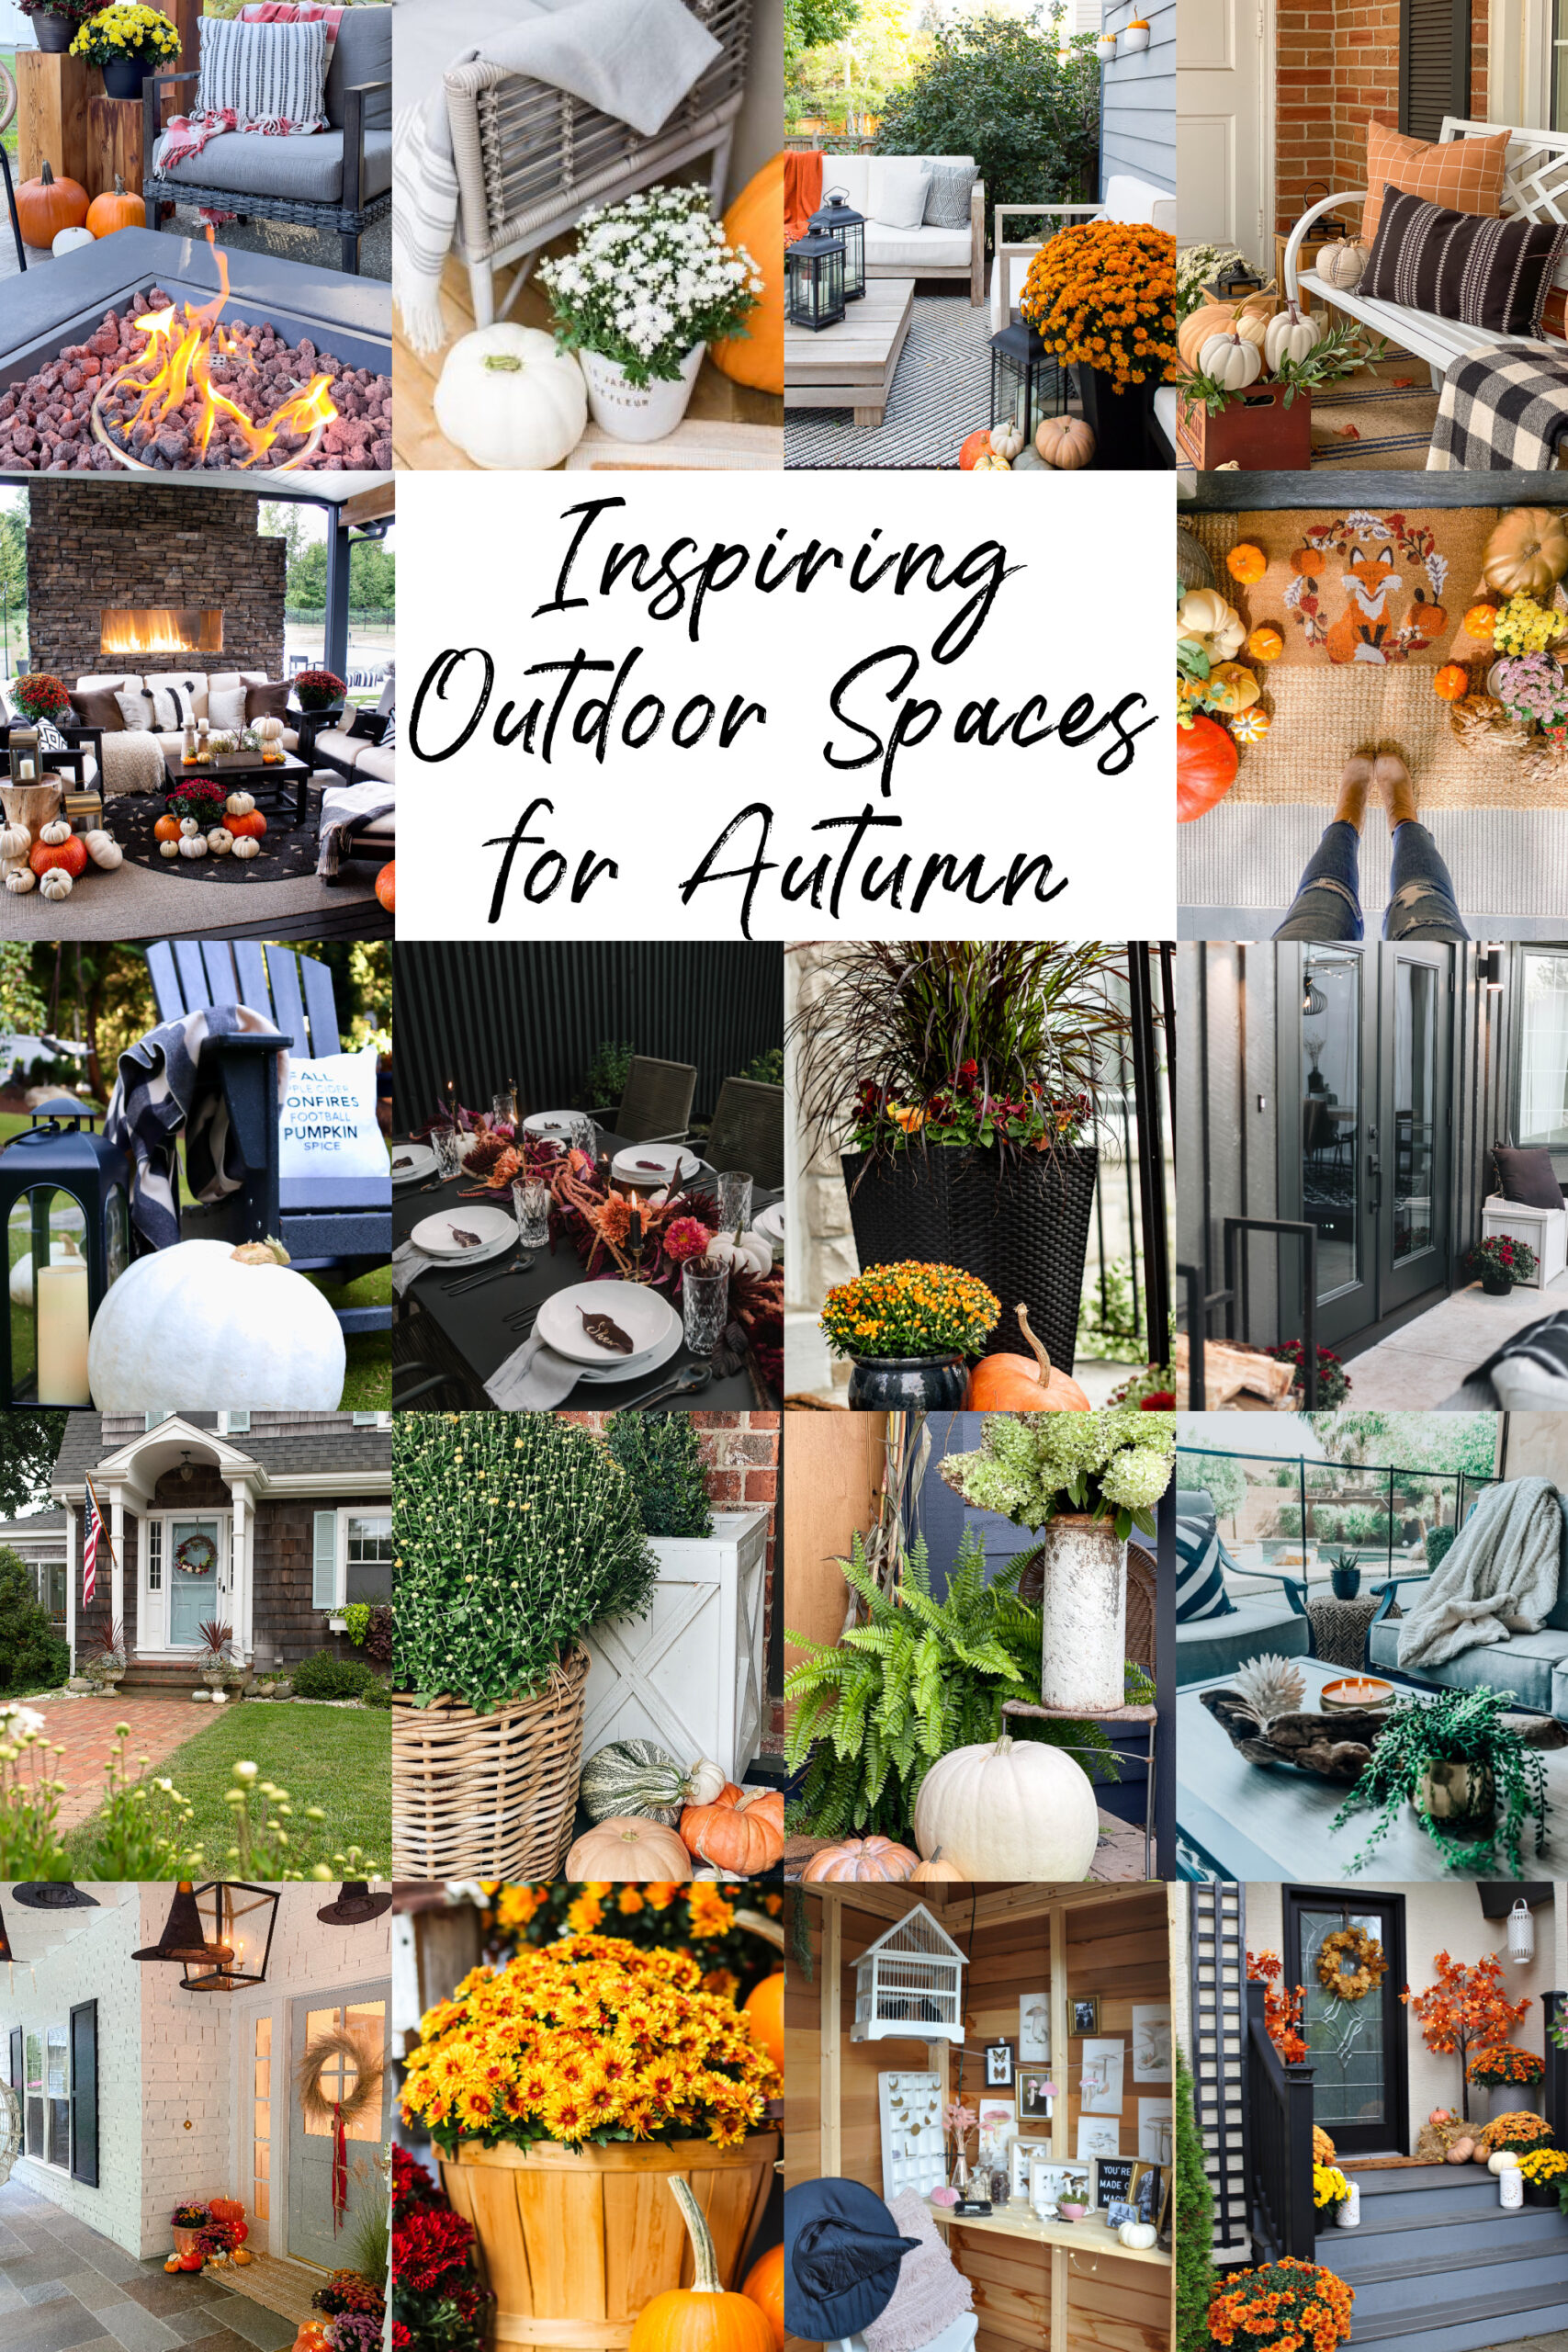 Inspiring Outdoor Spaces For Autumn graphic.